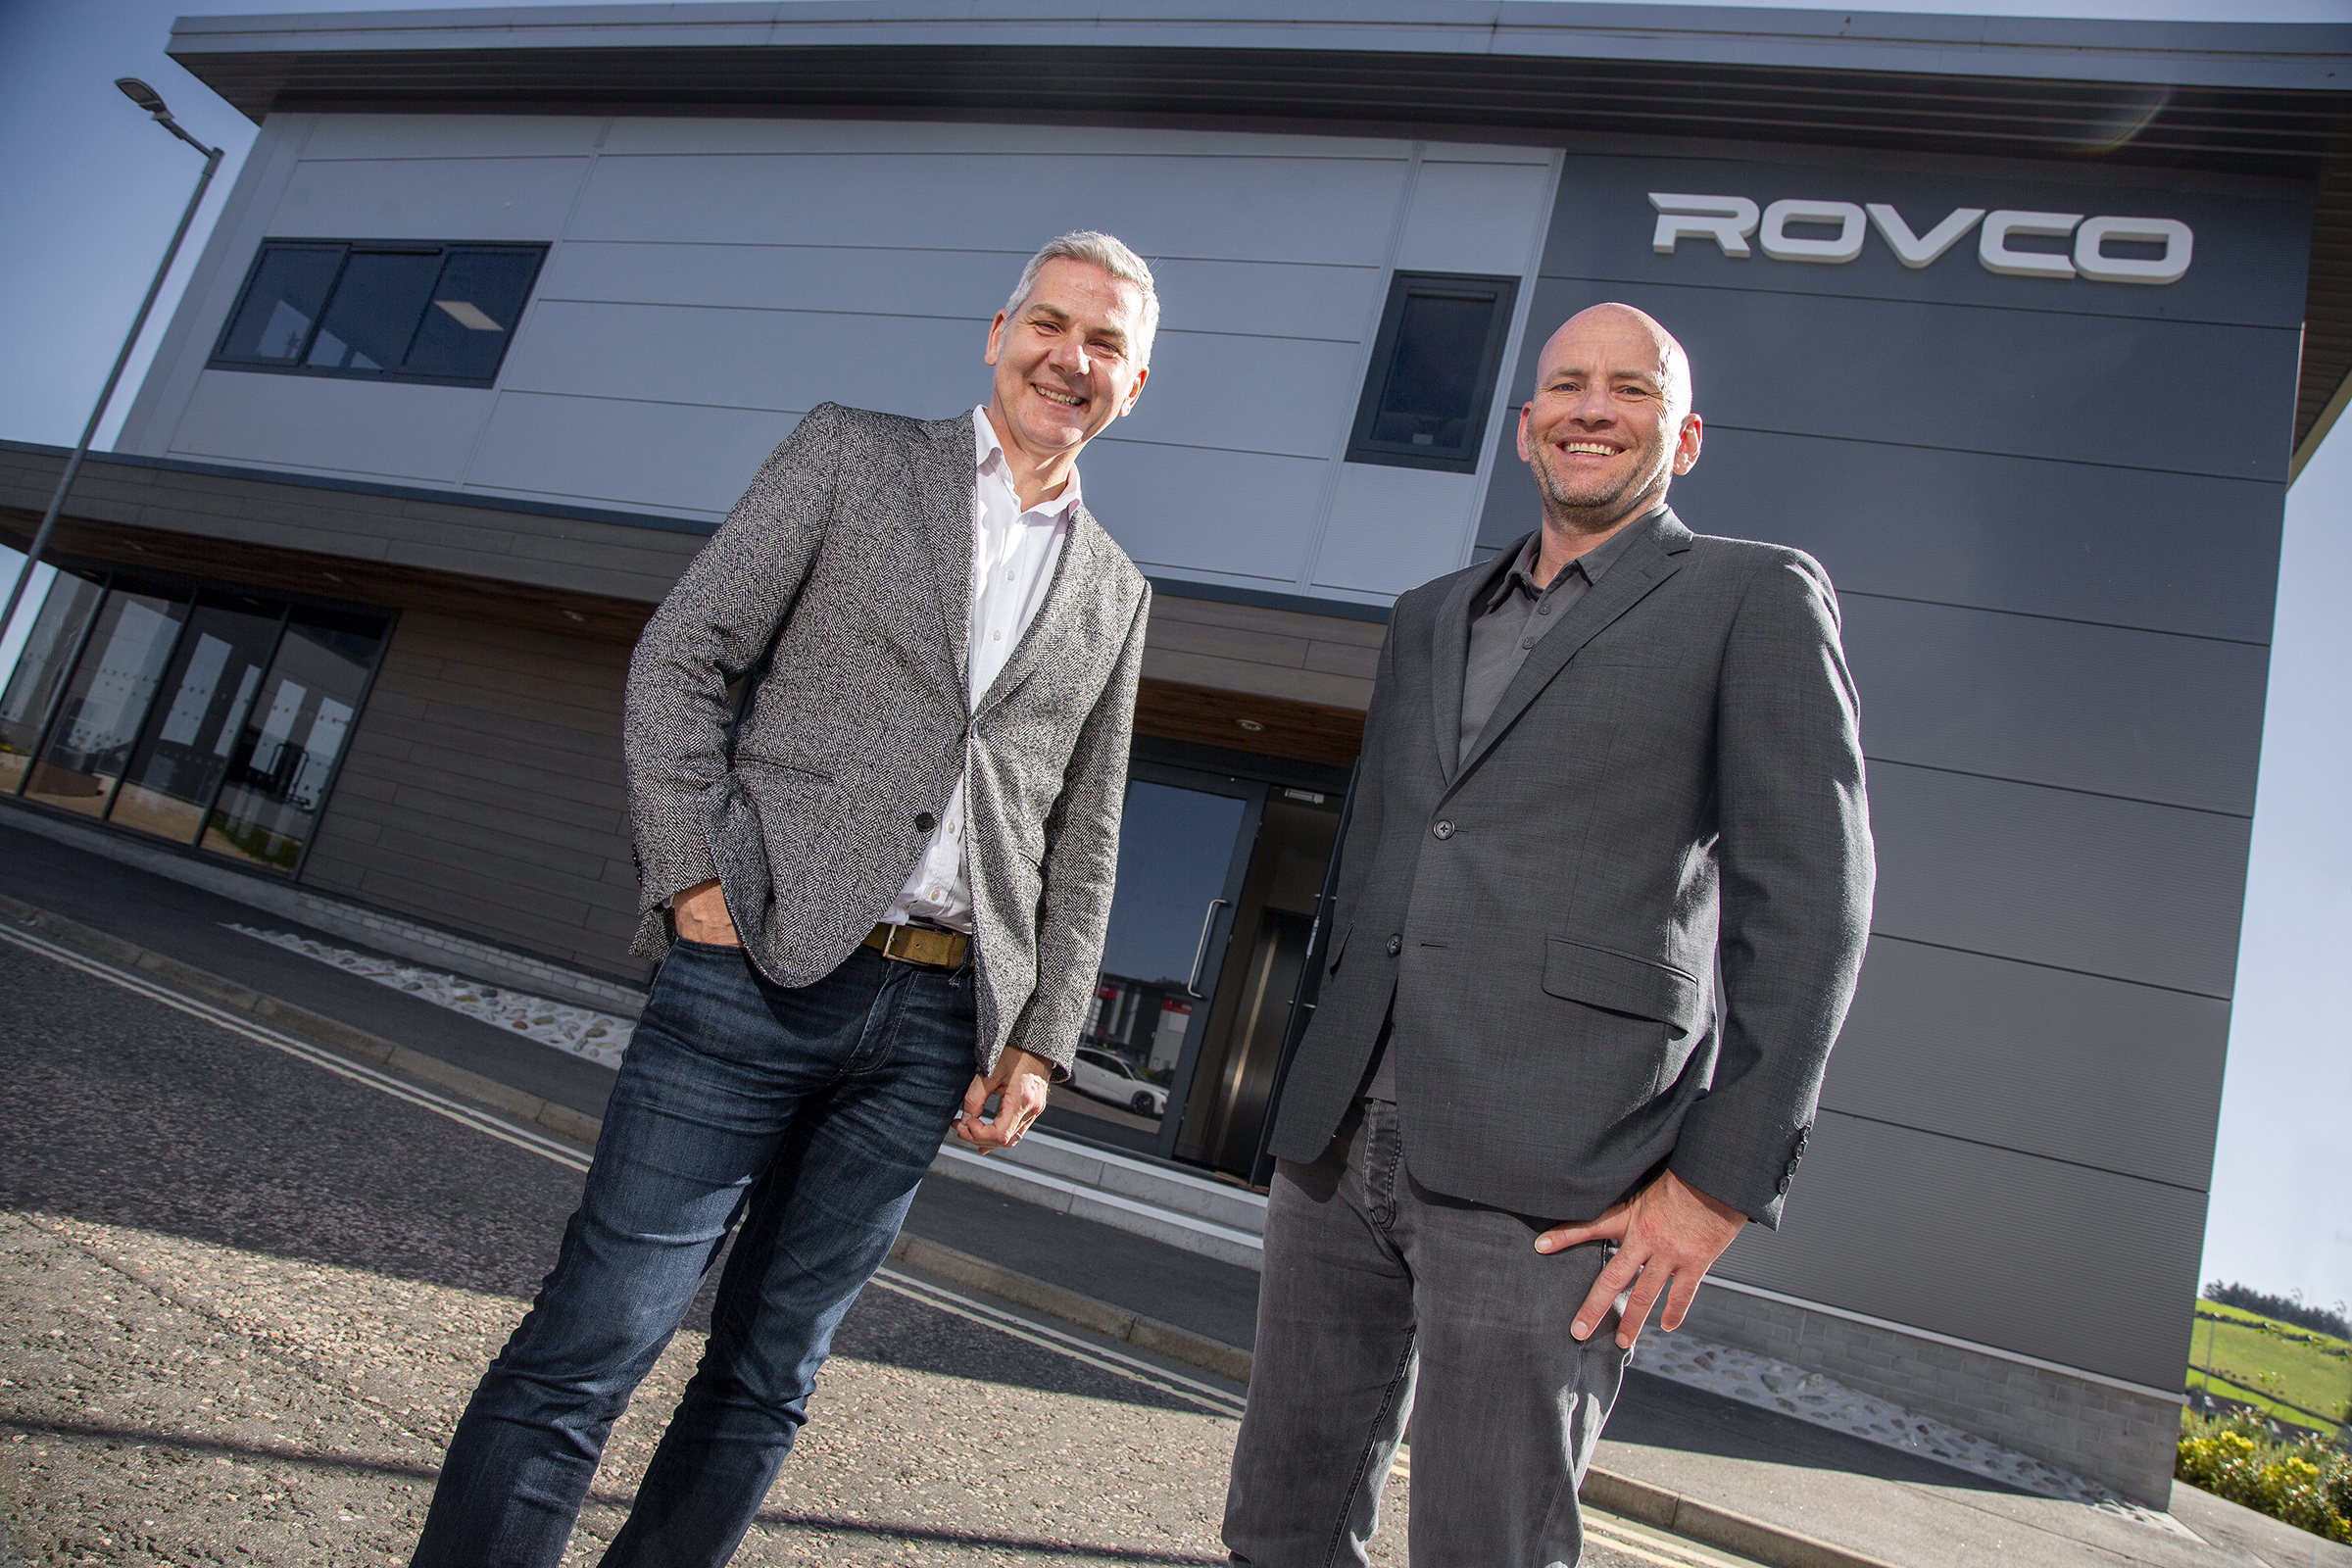 MEMBER NEWS: Offshore wind growth business Rovco recruiting for 100+ specialist roles